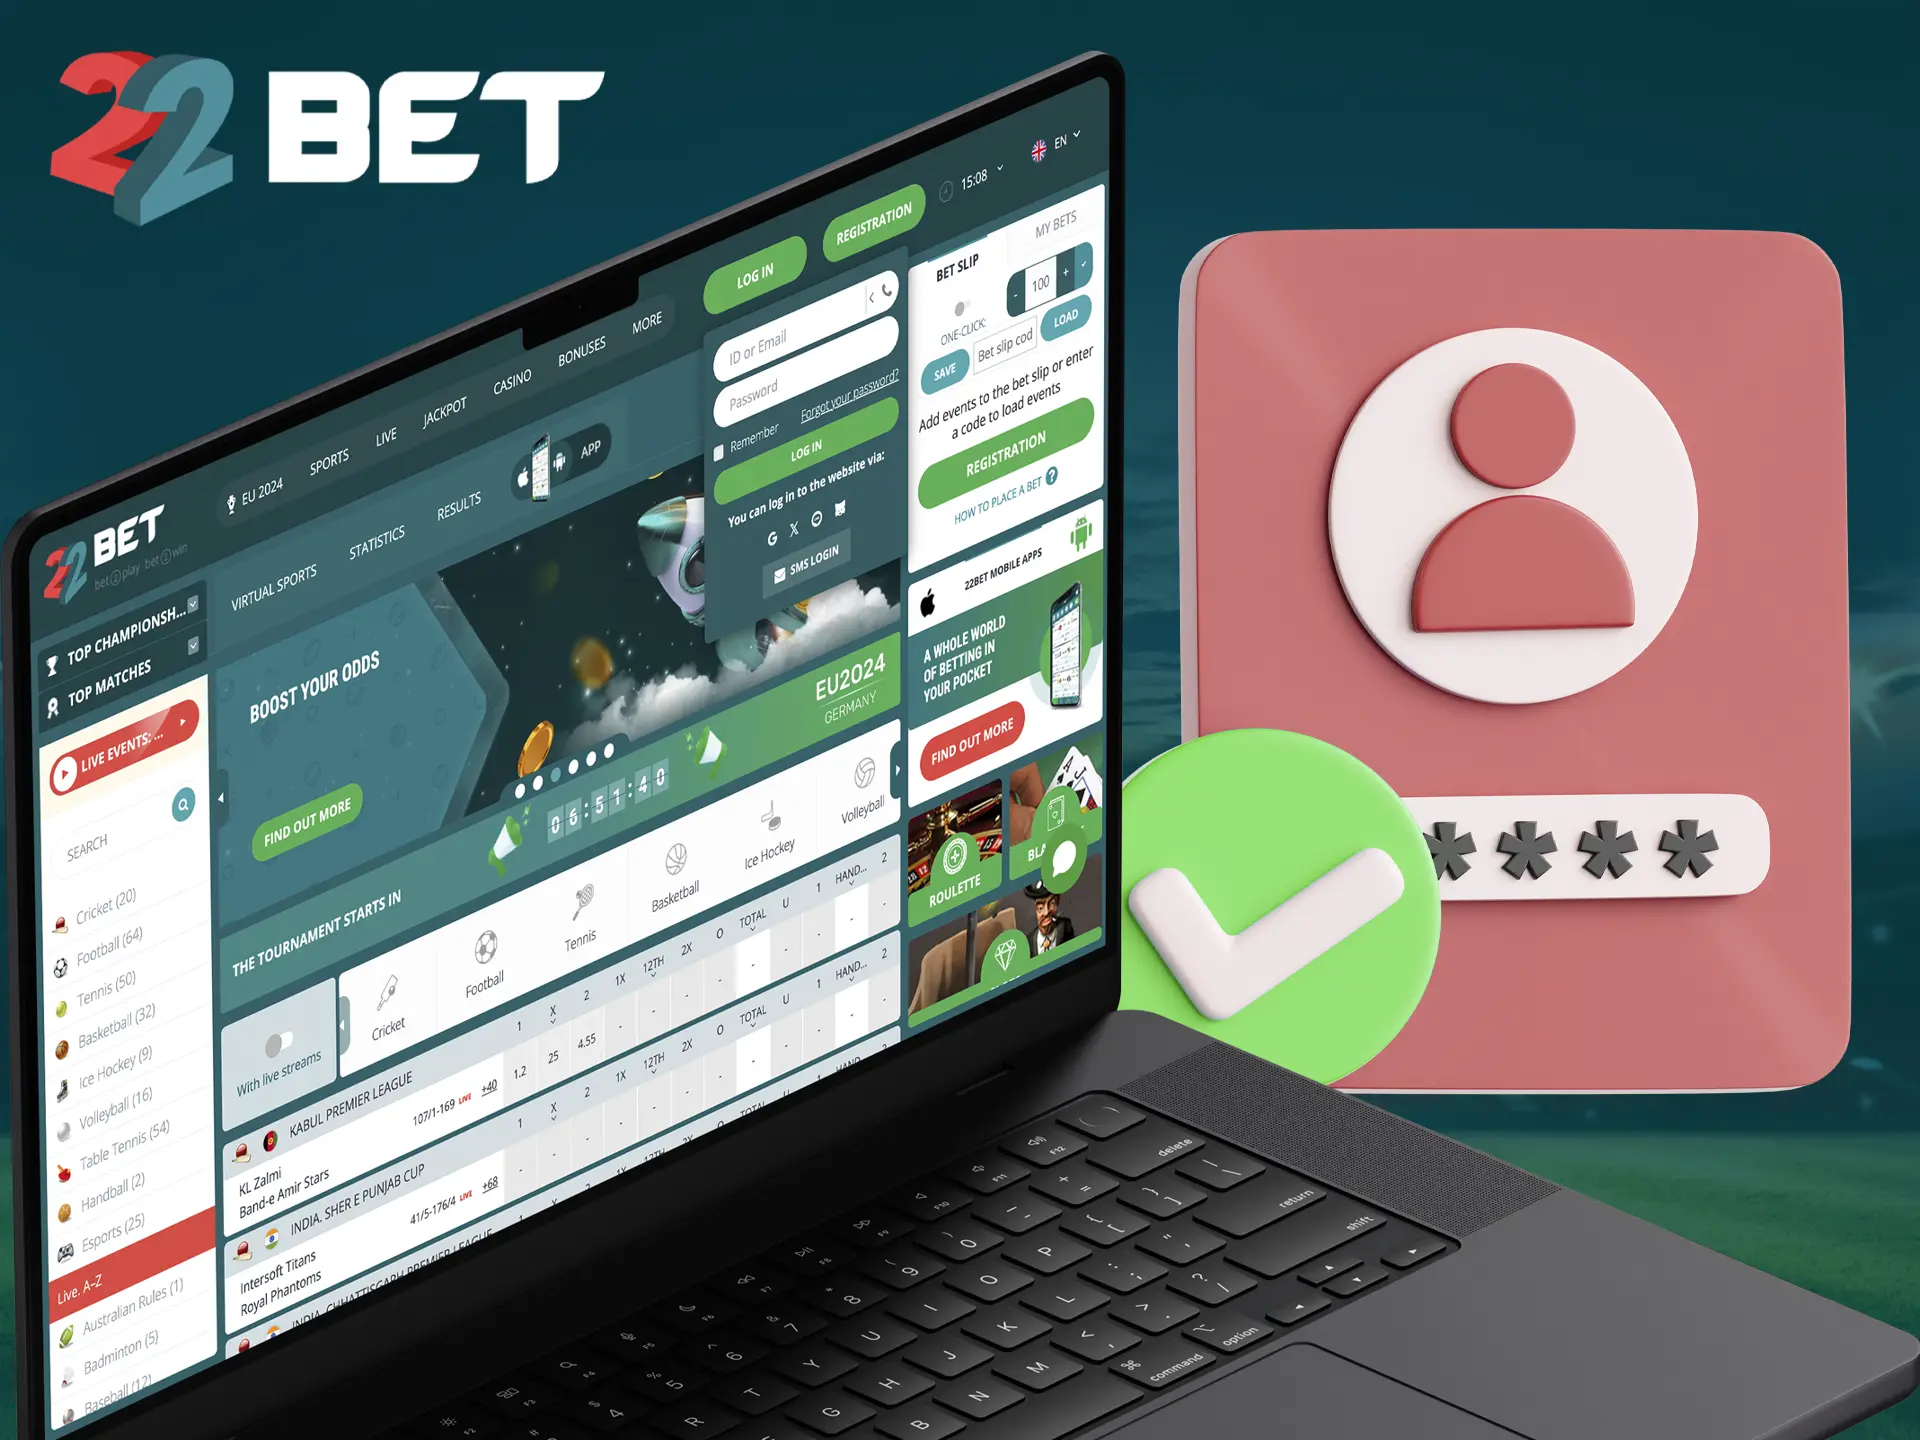 Log in to your personal 22Bet account to get instant access to betting on football events.